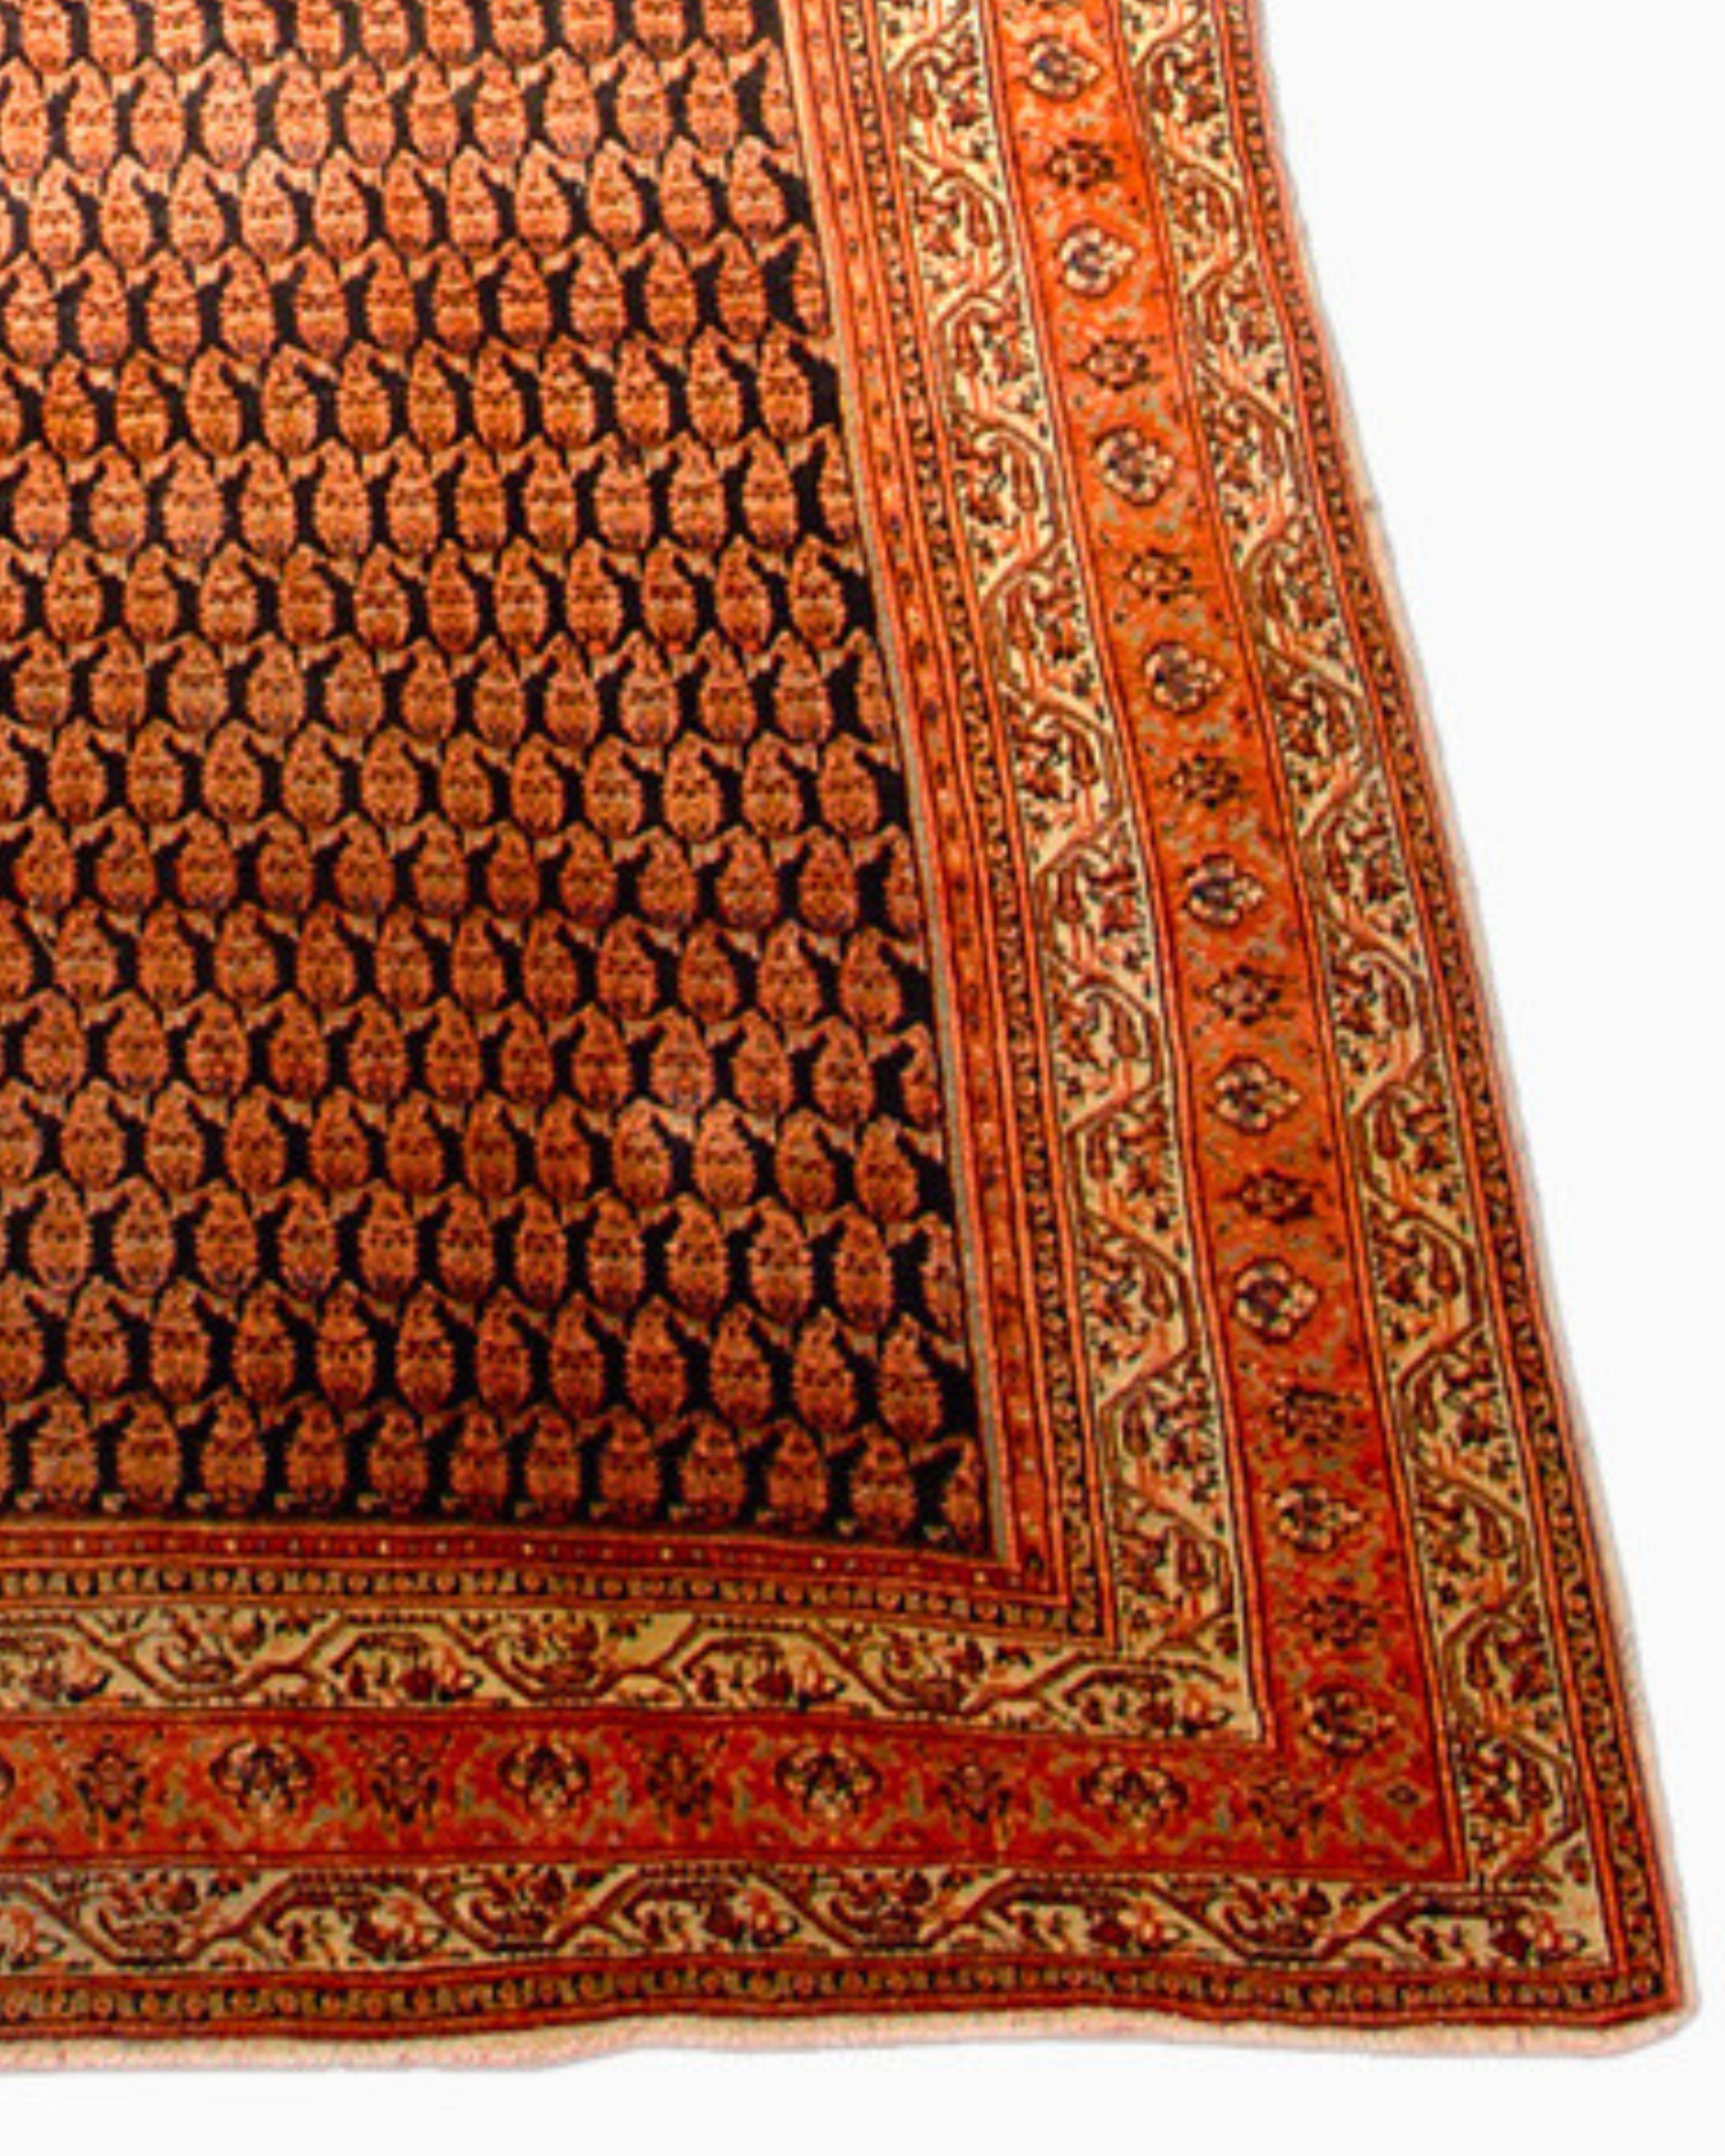 Wool Antique Large Persian Serebend Rug, 19th Century For Sale